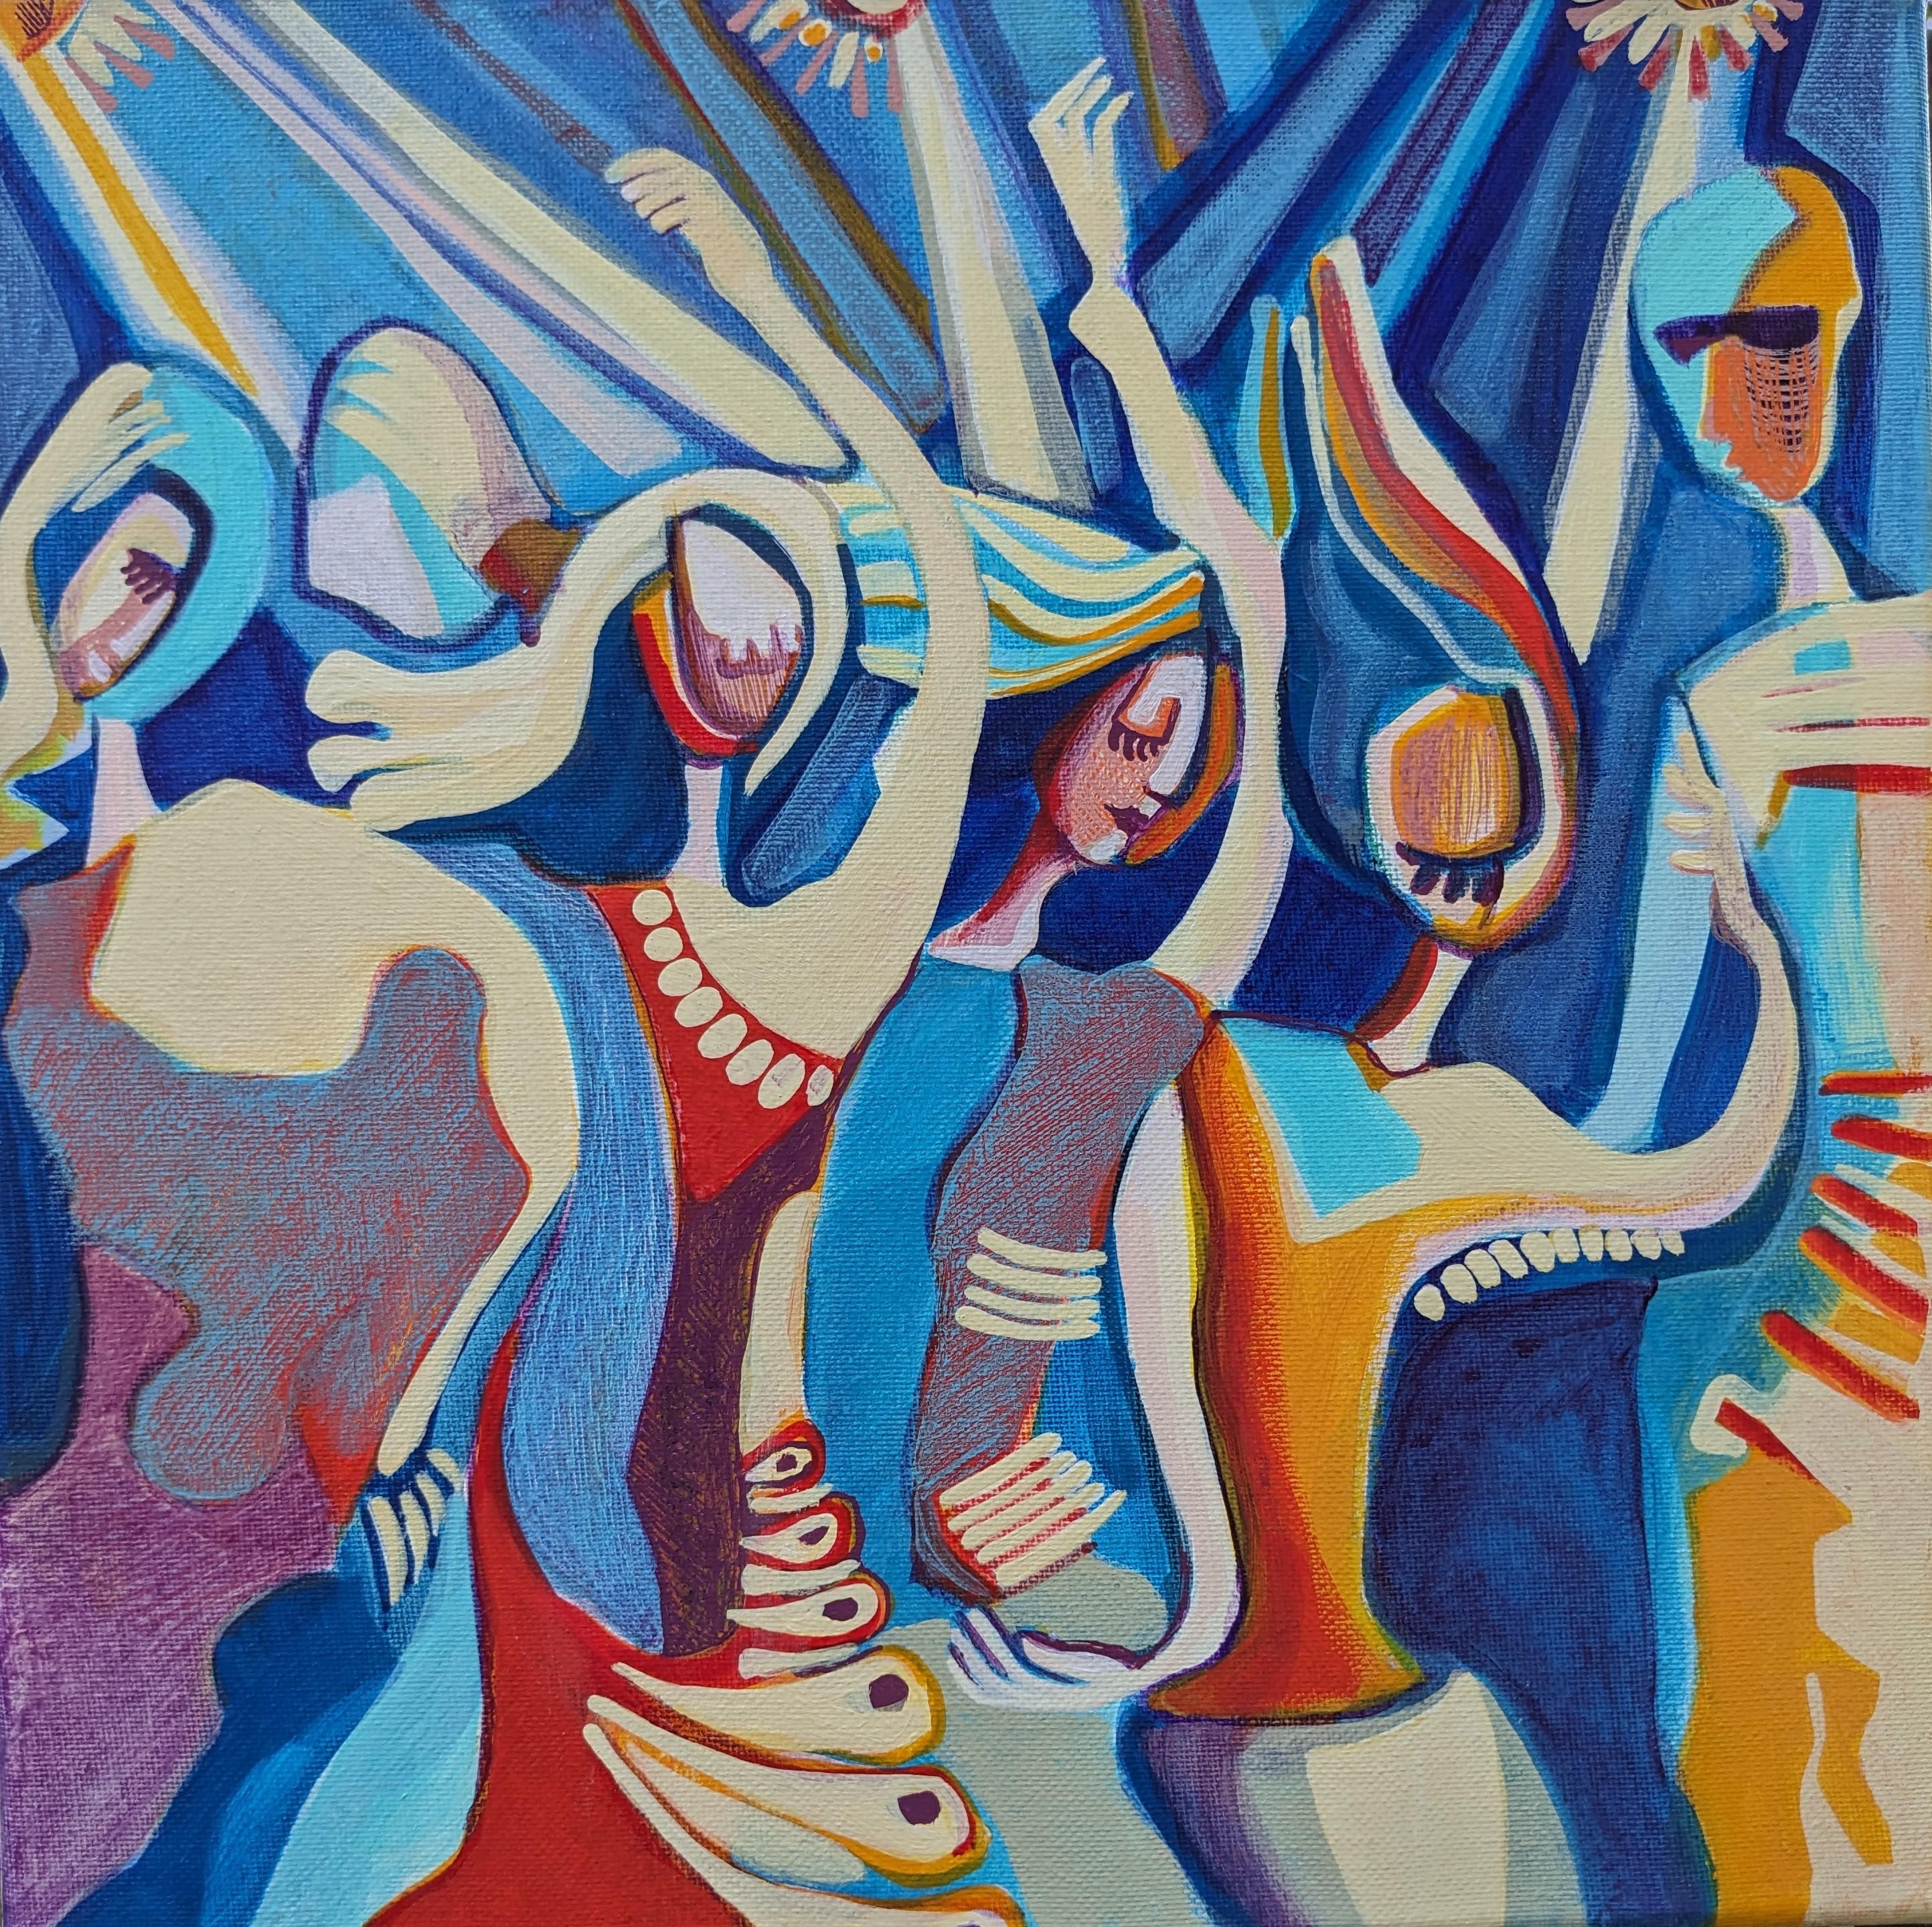 <p>Artist Comments<br>This painting shows a happy moment between friends dancing with each other. They close their eyes and lift their hands, fully immersing themselves in the experience. With every move to the rhythm, their hair and dresses sway,